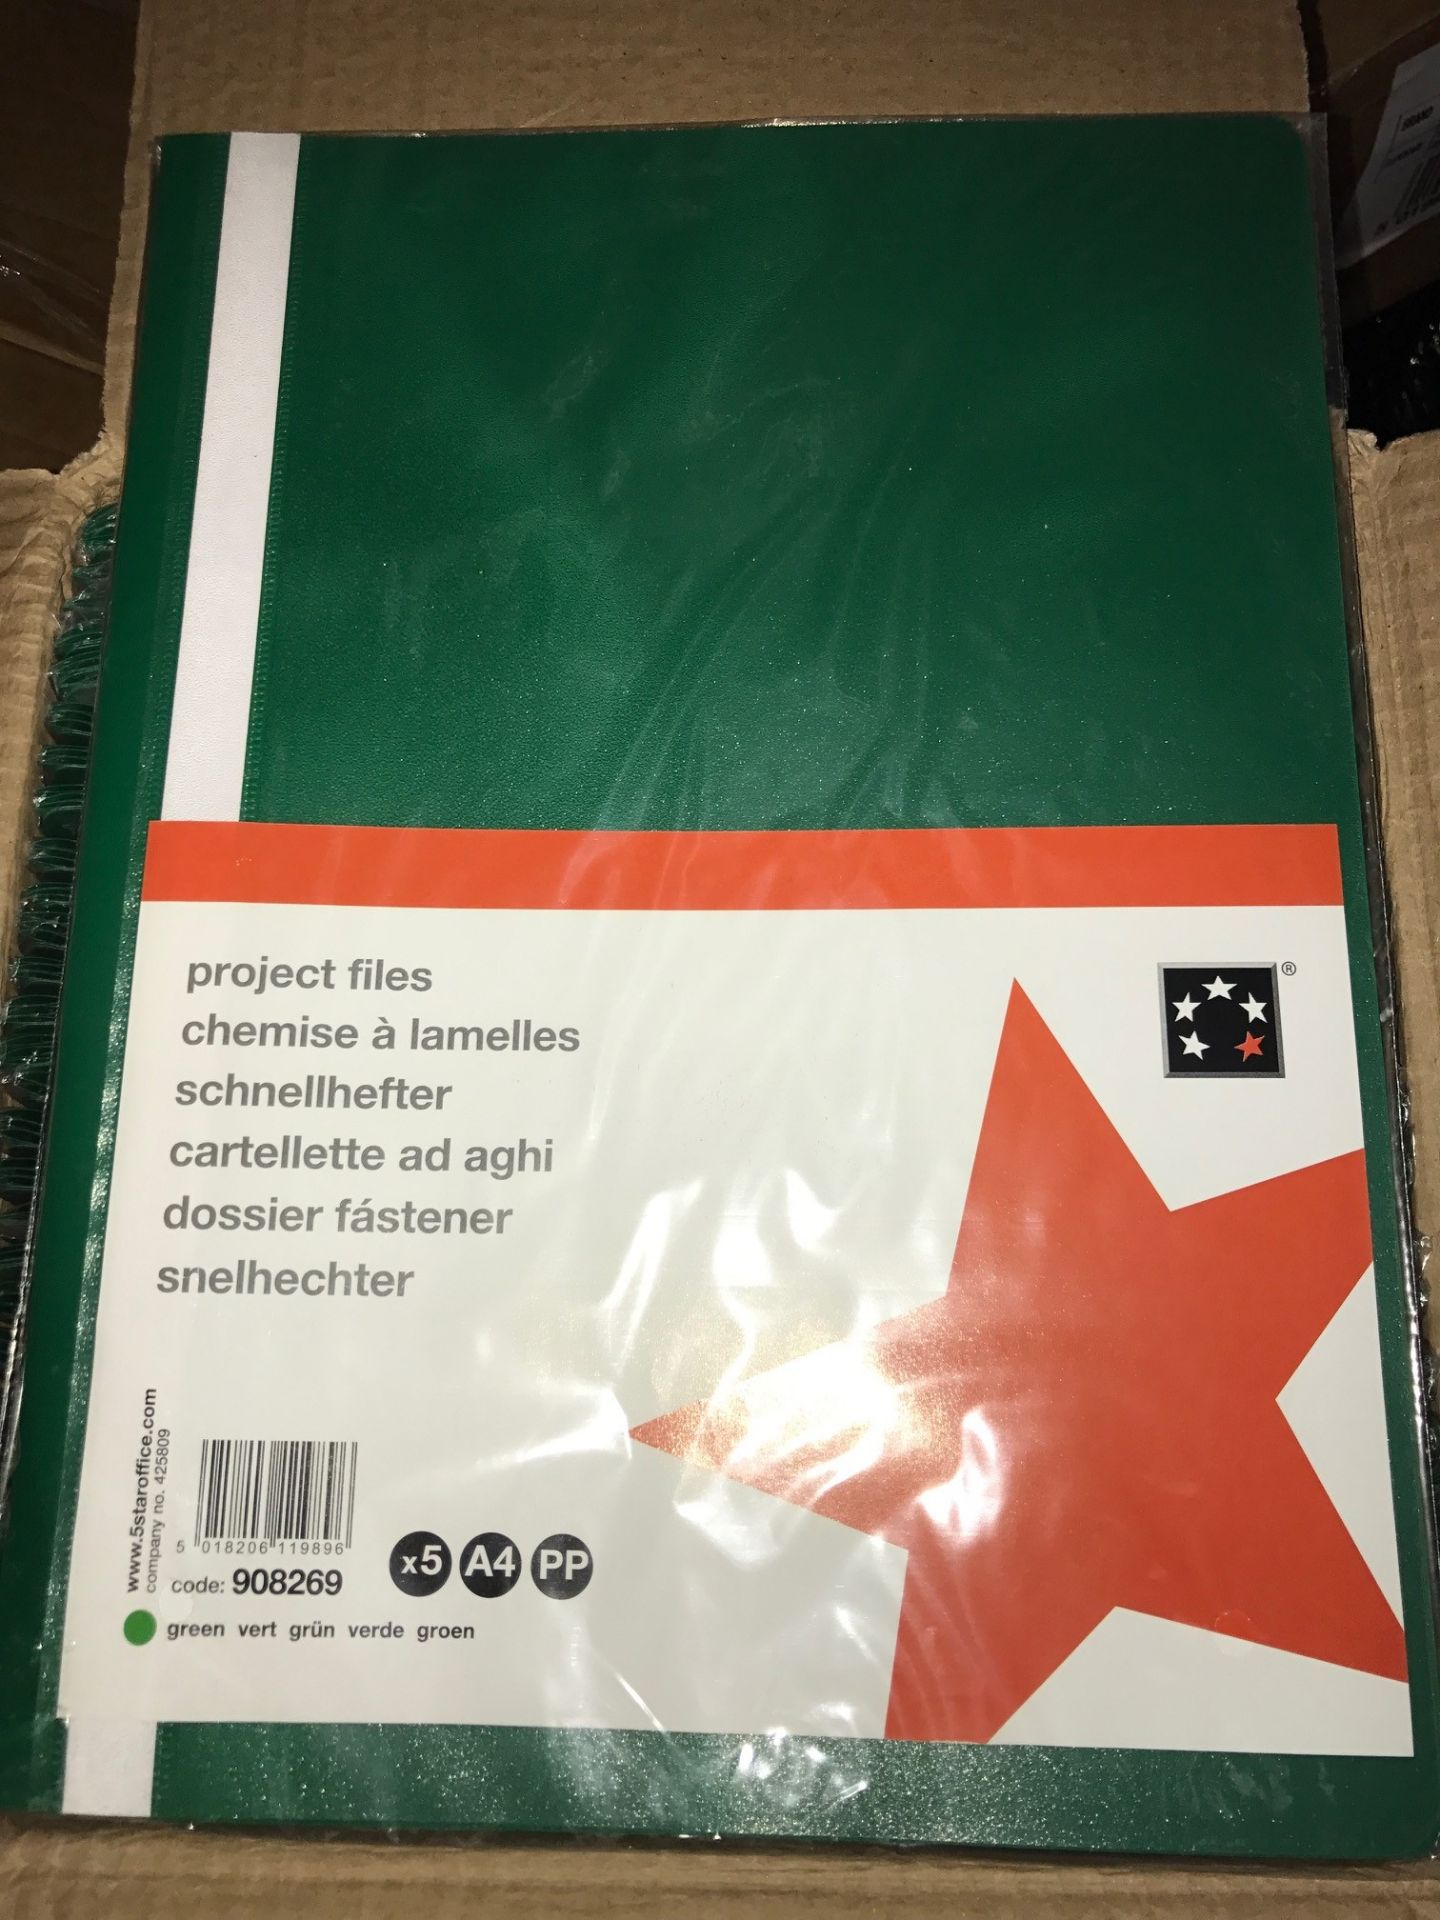 1 x Box of 5 Star Project Files A4 Green - 60 x Packs of 5 Files in Total - Online Price £5.88 Per